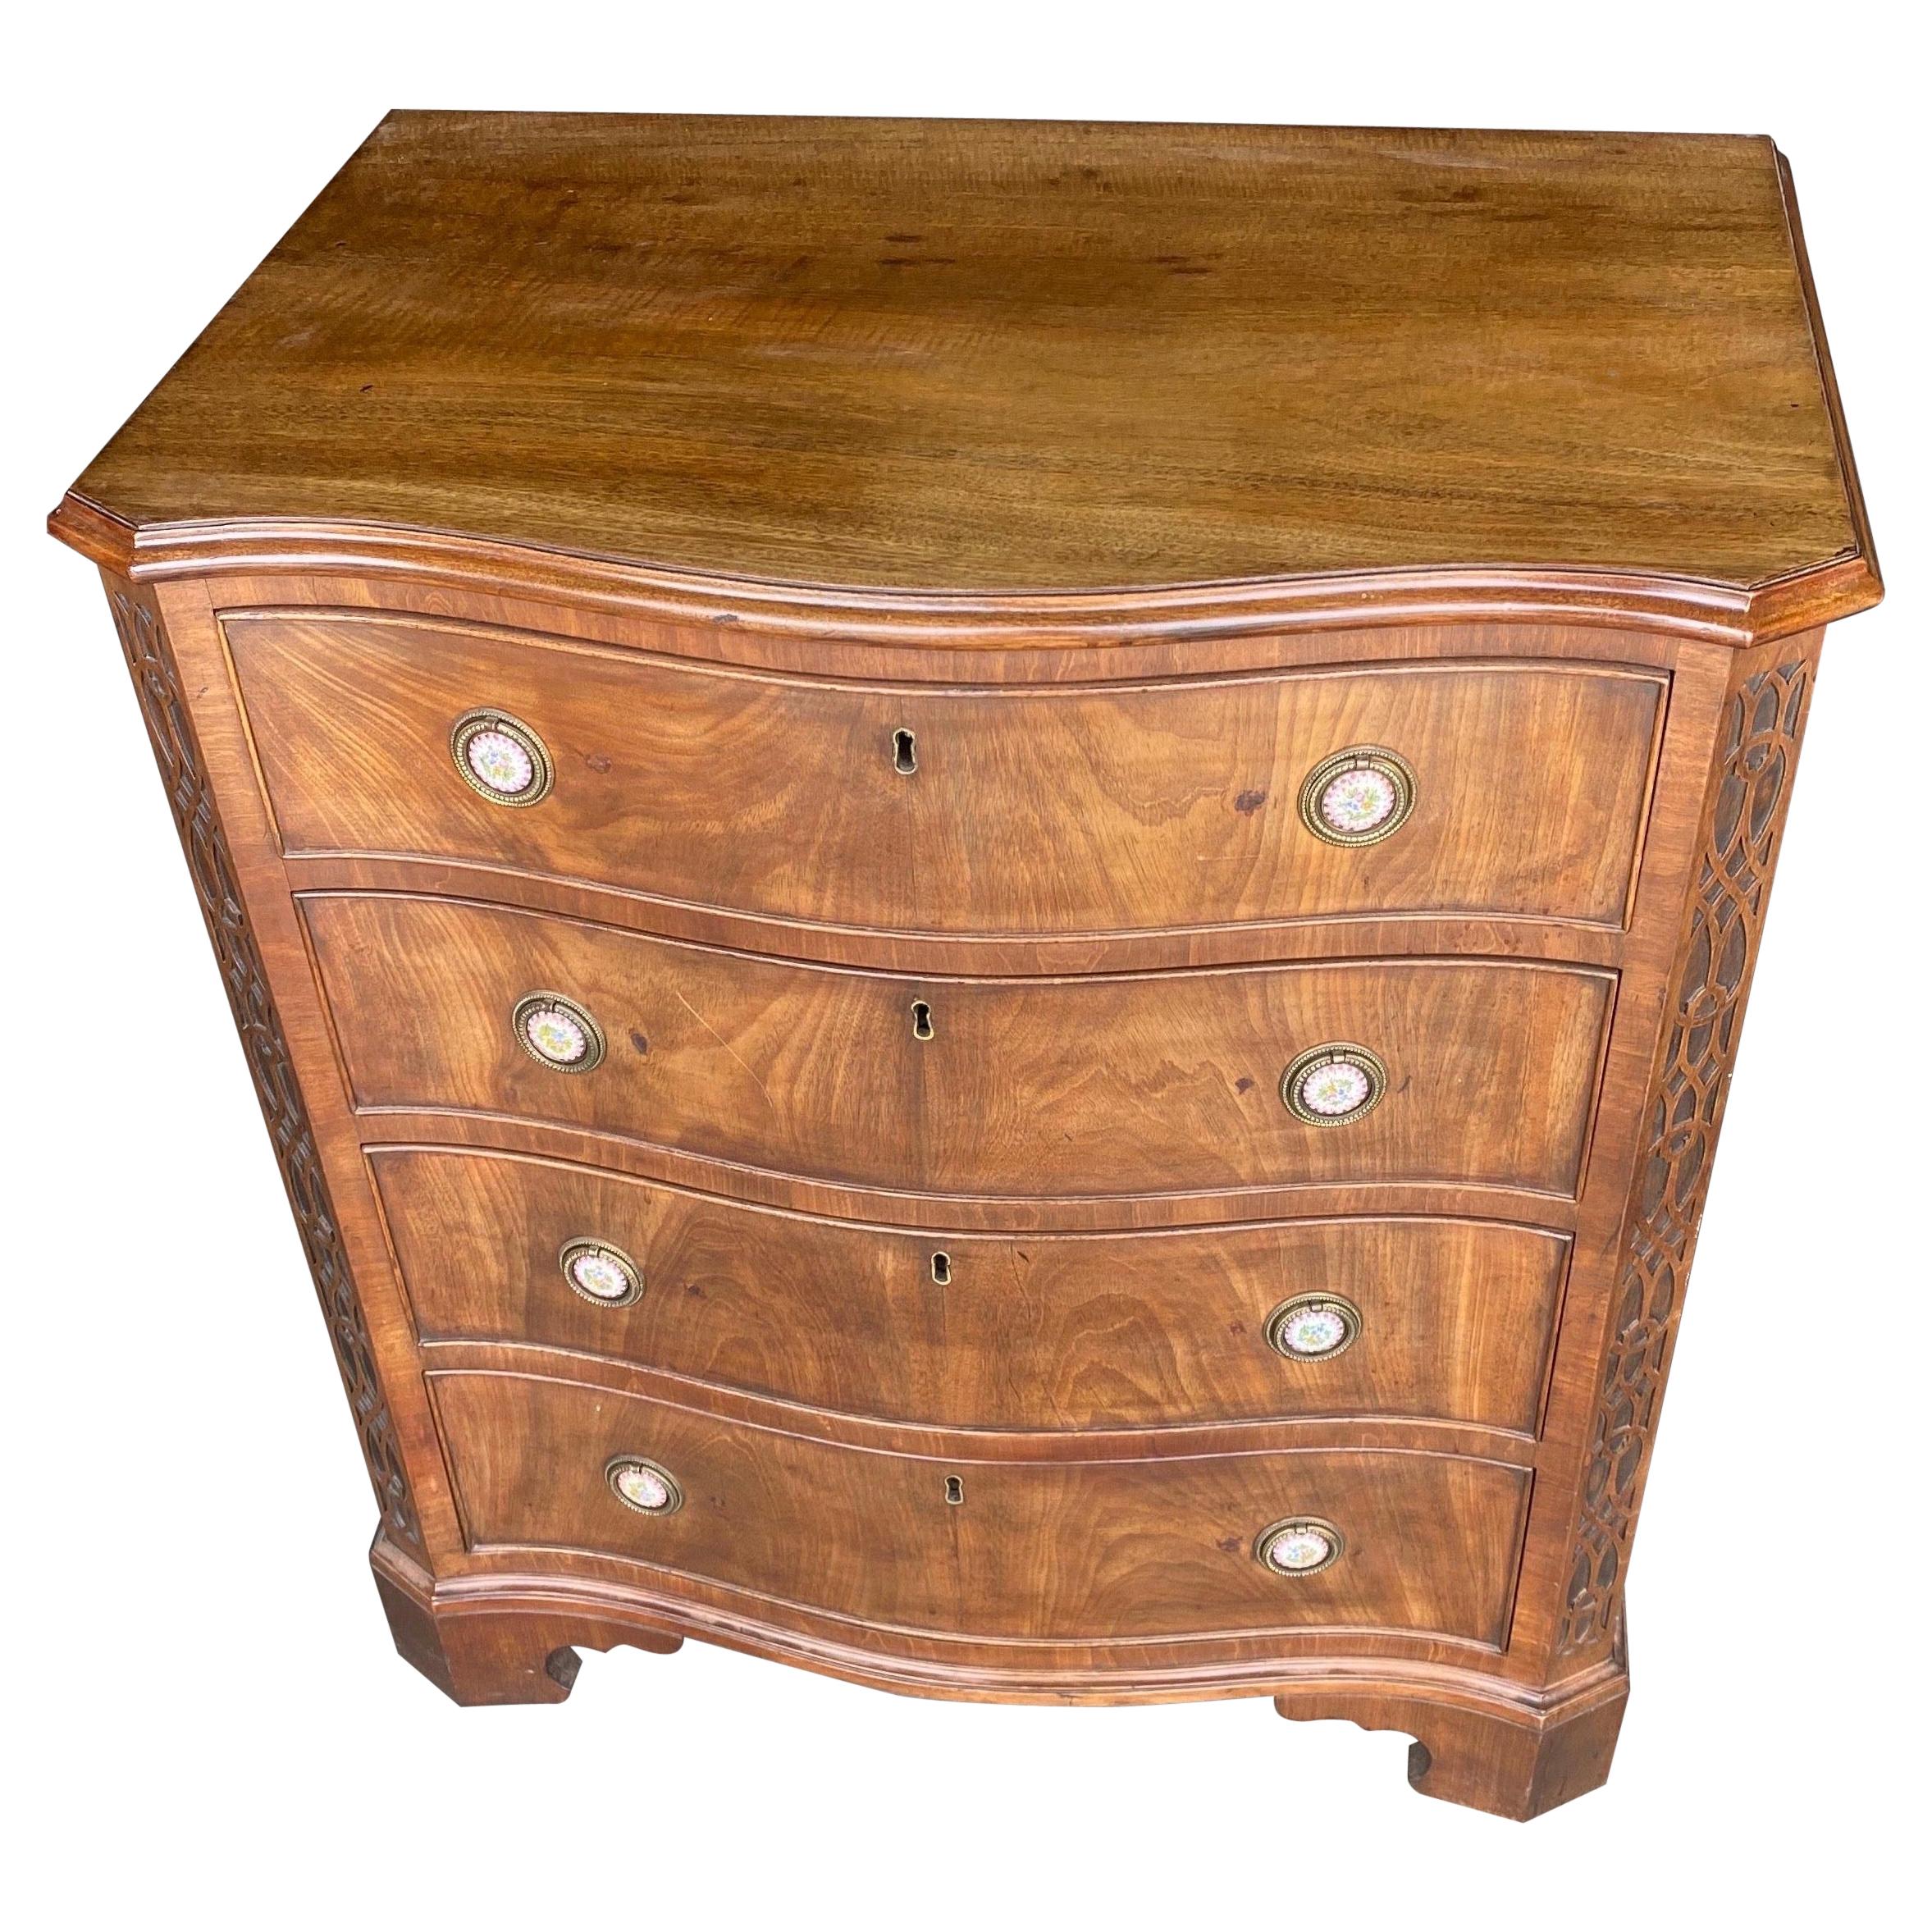 Late 18th-early 19th Century Petite Serpentine Georgian Mahogany Dressing Chest For Sale